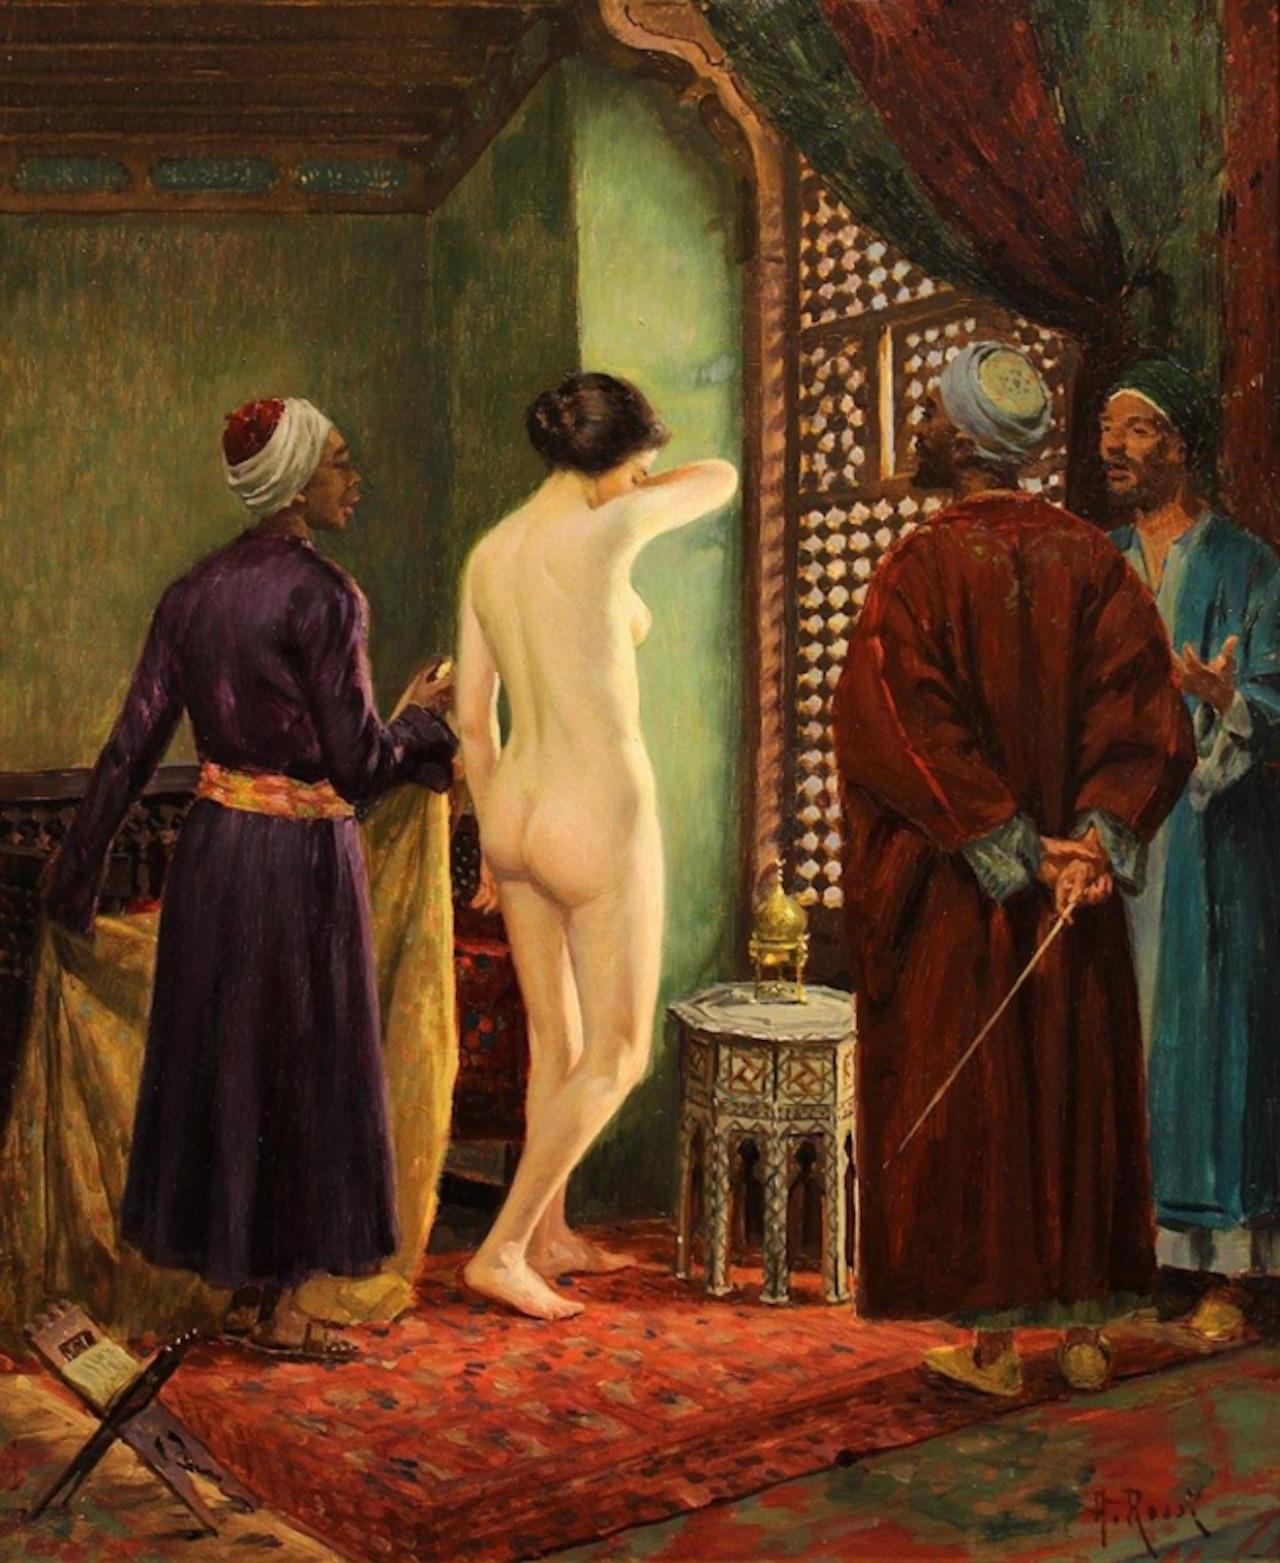 Alberto Rossi (Torino 1858-Torino 1936)
Orientalist interior with slave
Signed lower right: A. Rossi

Alberto Rossi is trained at the Albertine trine academy, which he attends to leave in 1876.
Here, he follows the courses of Andrea Gastaldi